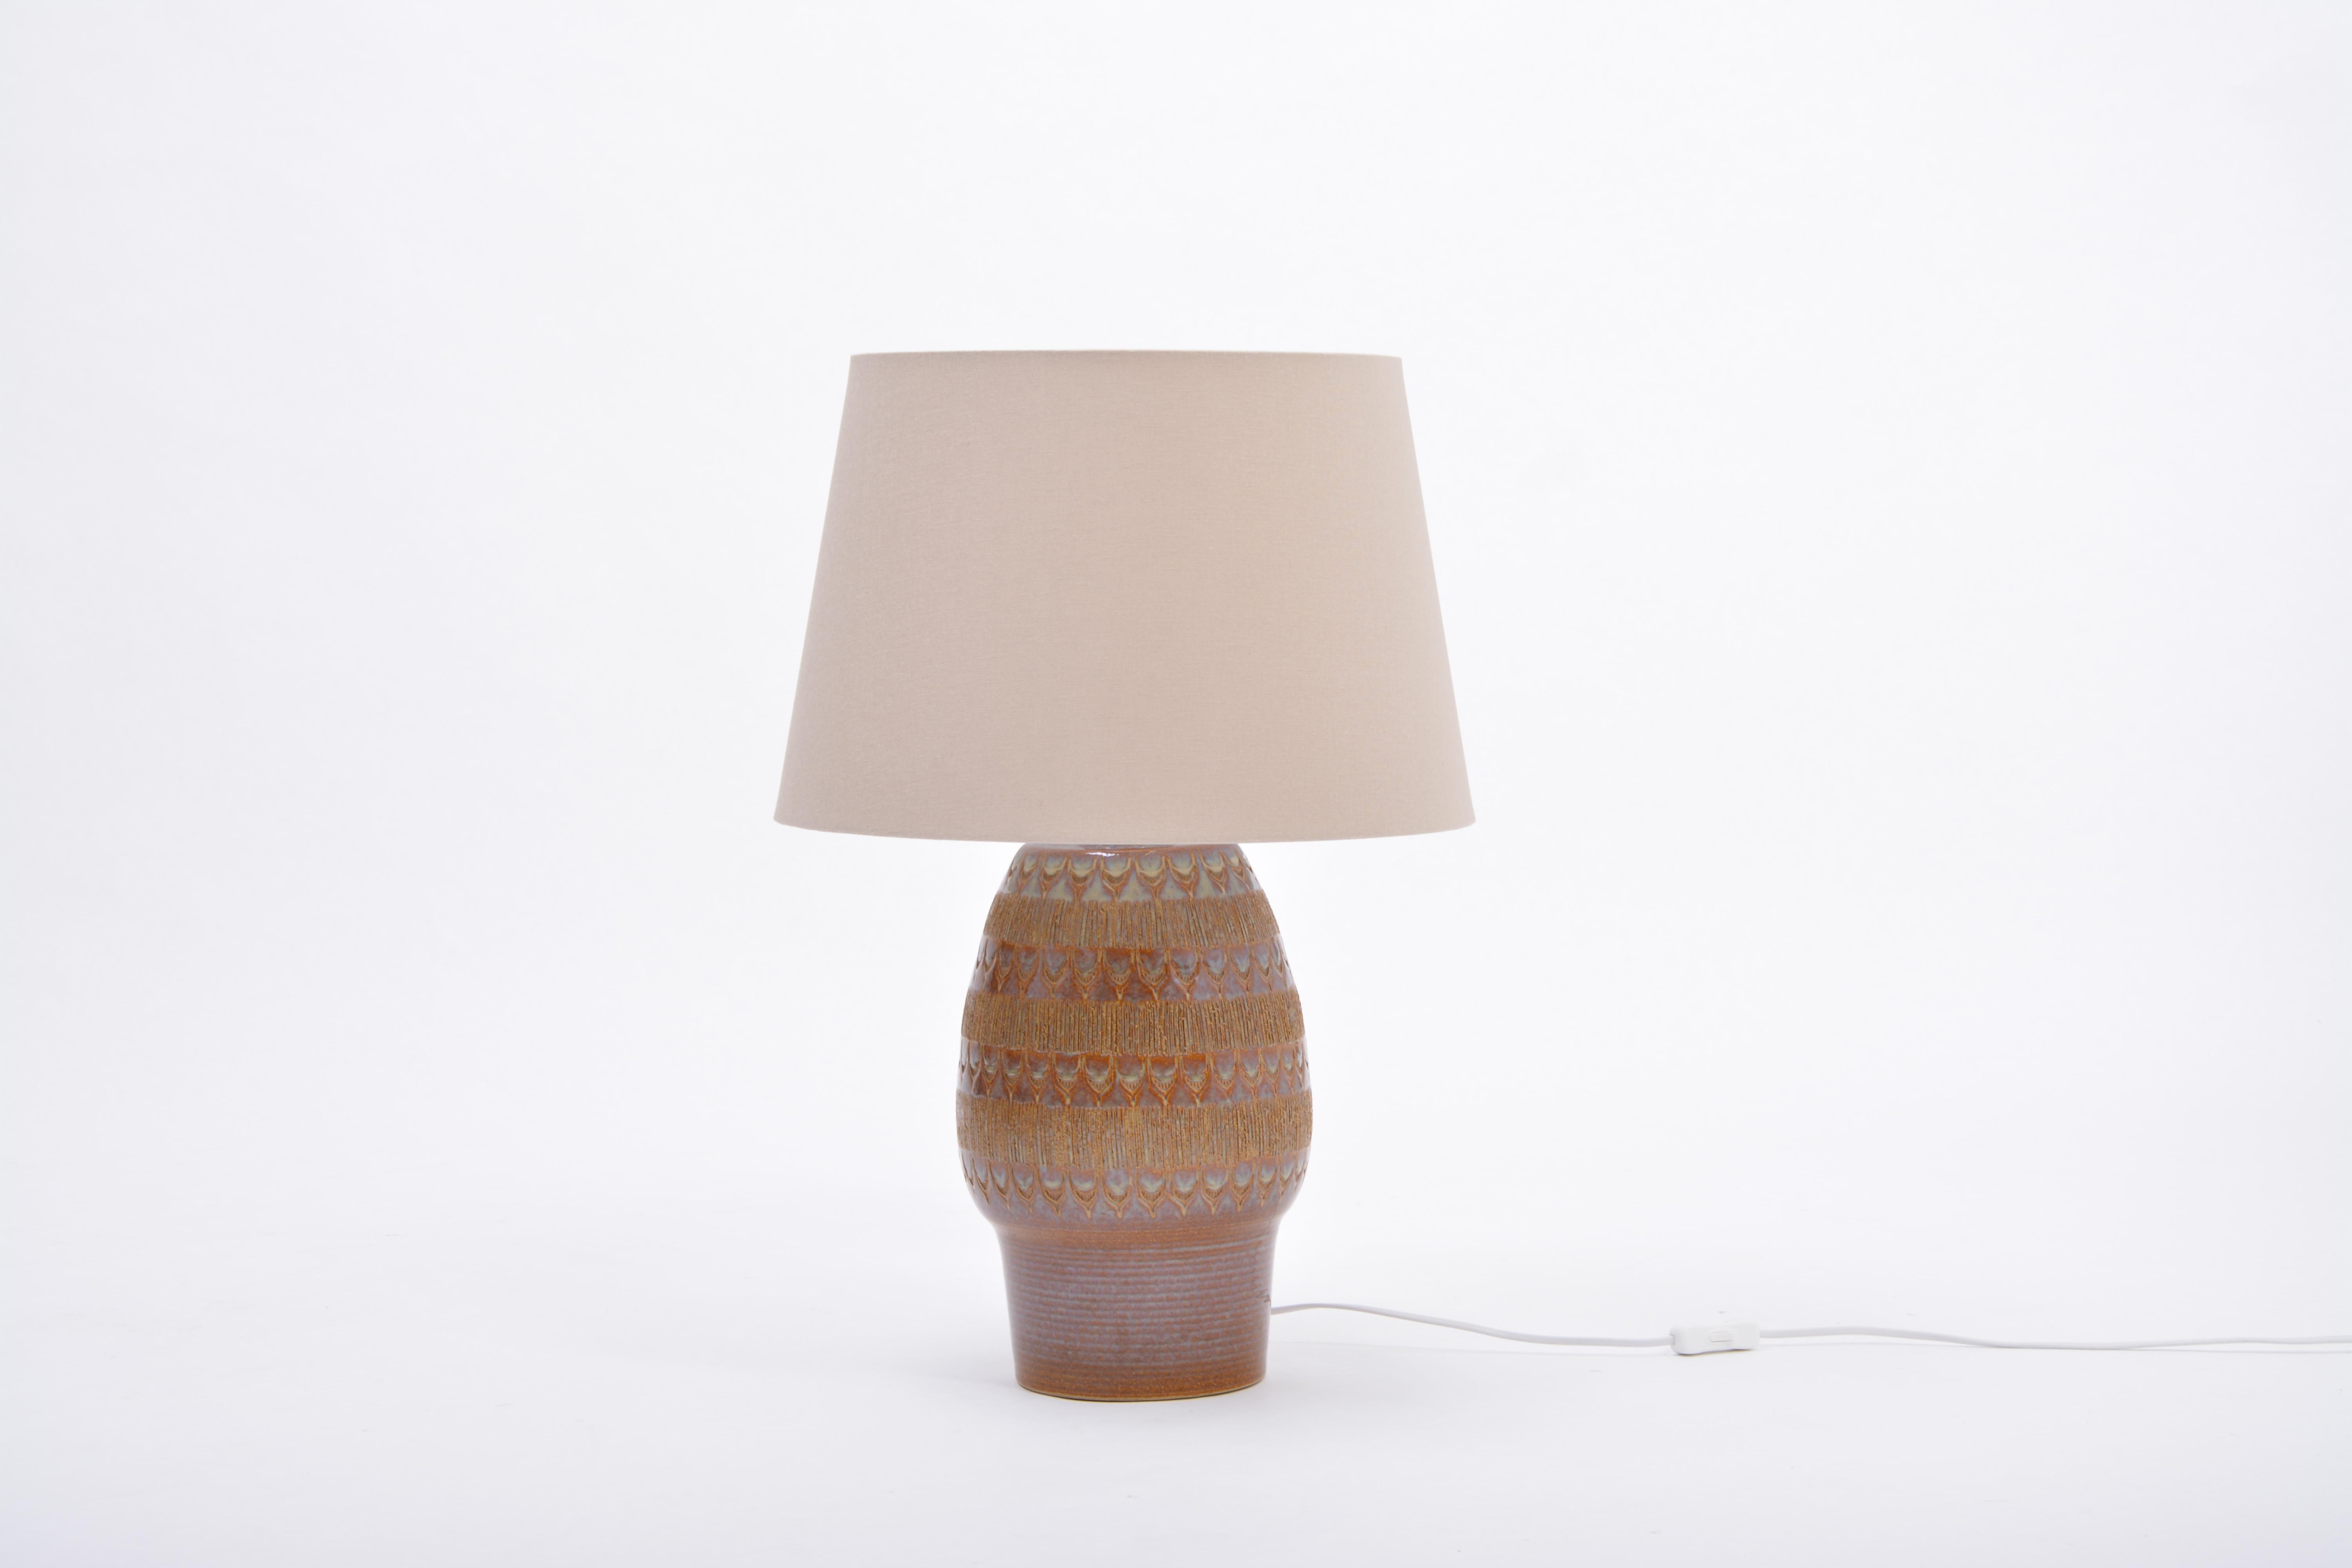 Brown handmade Mid-Century Modern Danish stoneware table lamp by Soholm Stentoj

Spectacular tall table lamp made of stoneware with ceramic glazing in various tones of blue. The base of the lamp features various graphic patterns. Handmade in